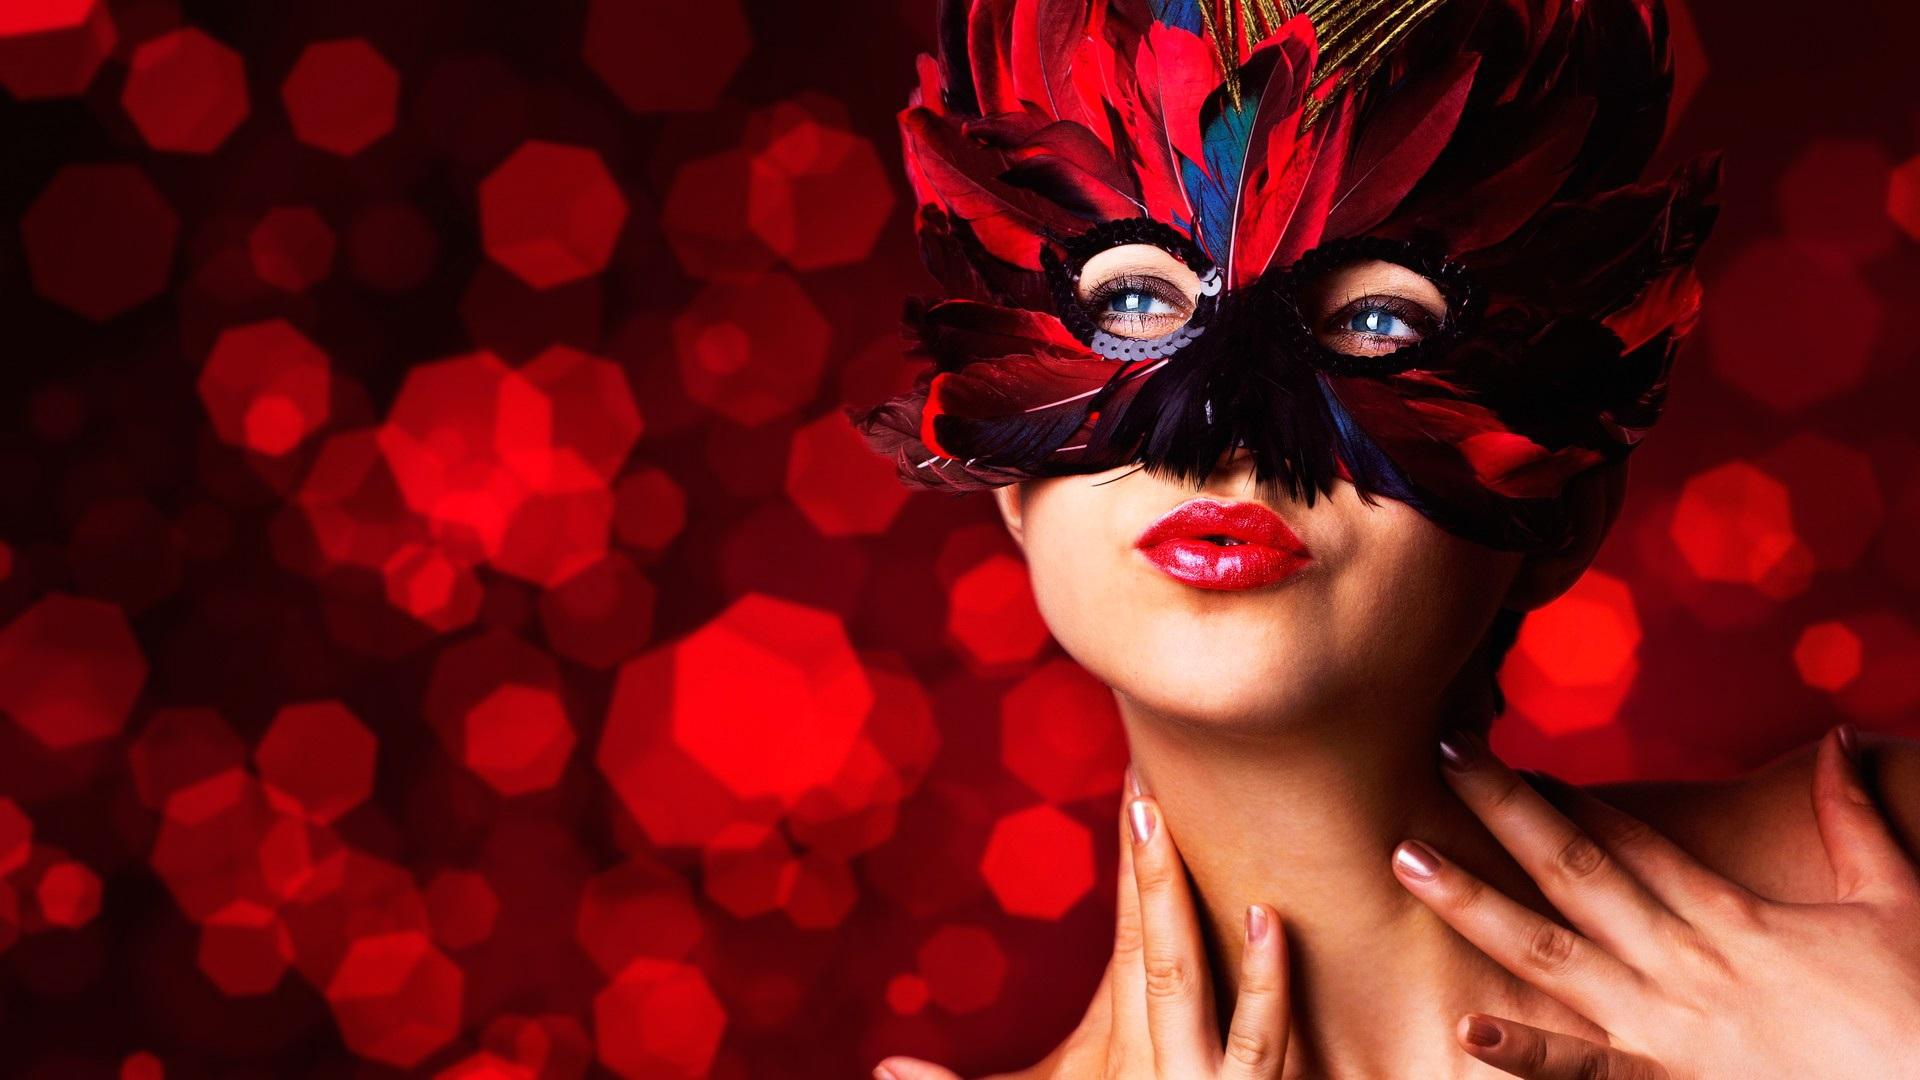 Wallpaper Masquerade, Mask, Feathers, Make Up Girl, Red Lip